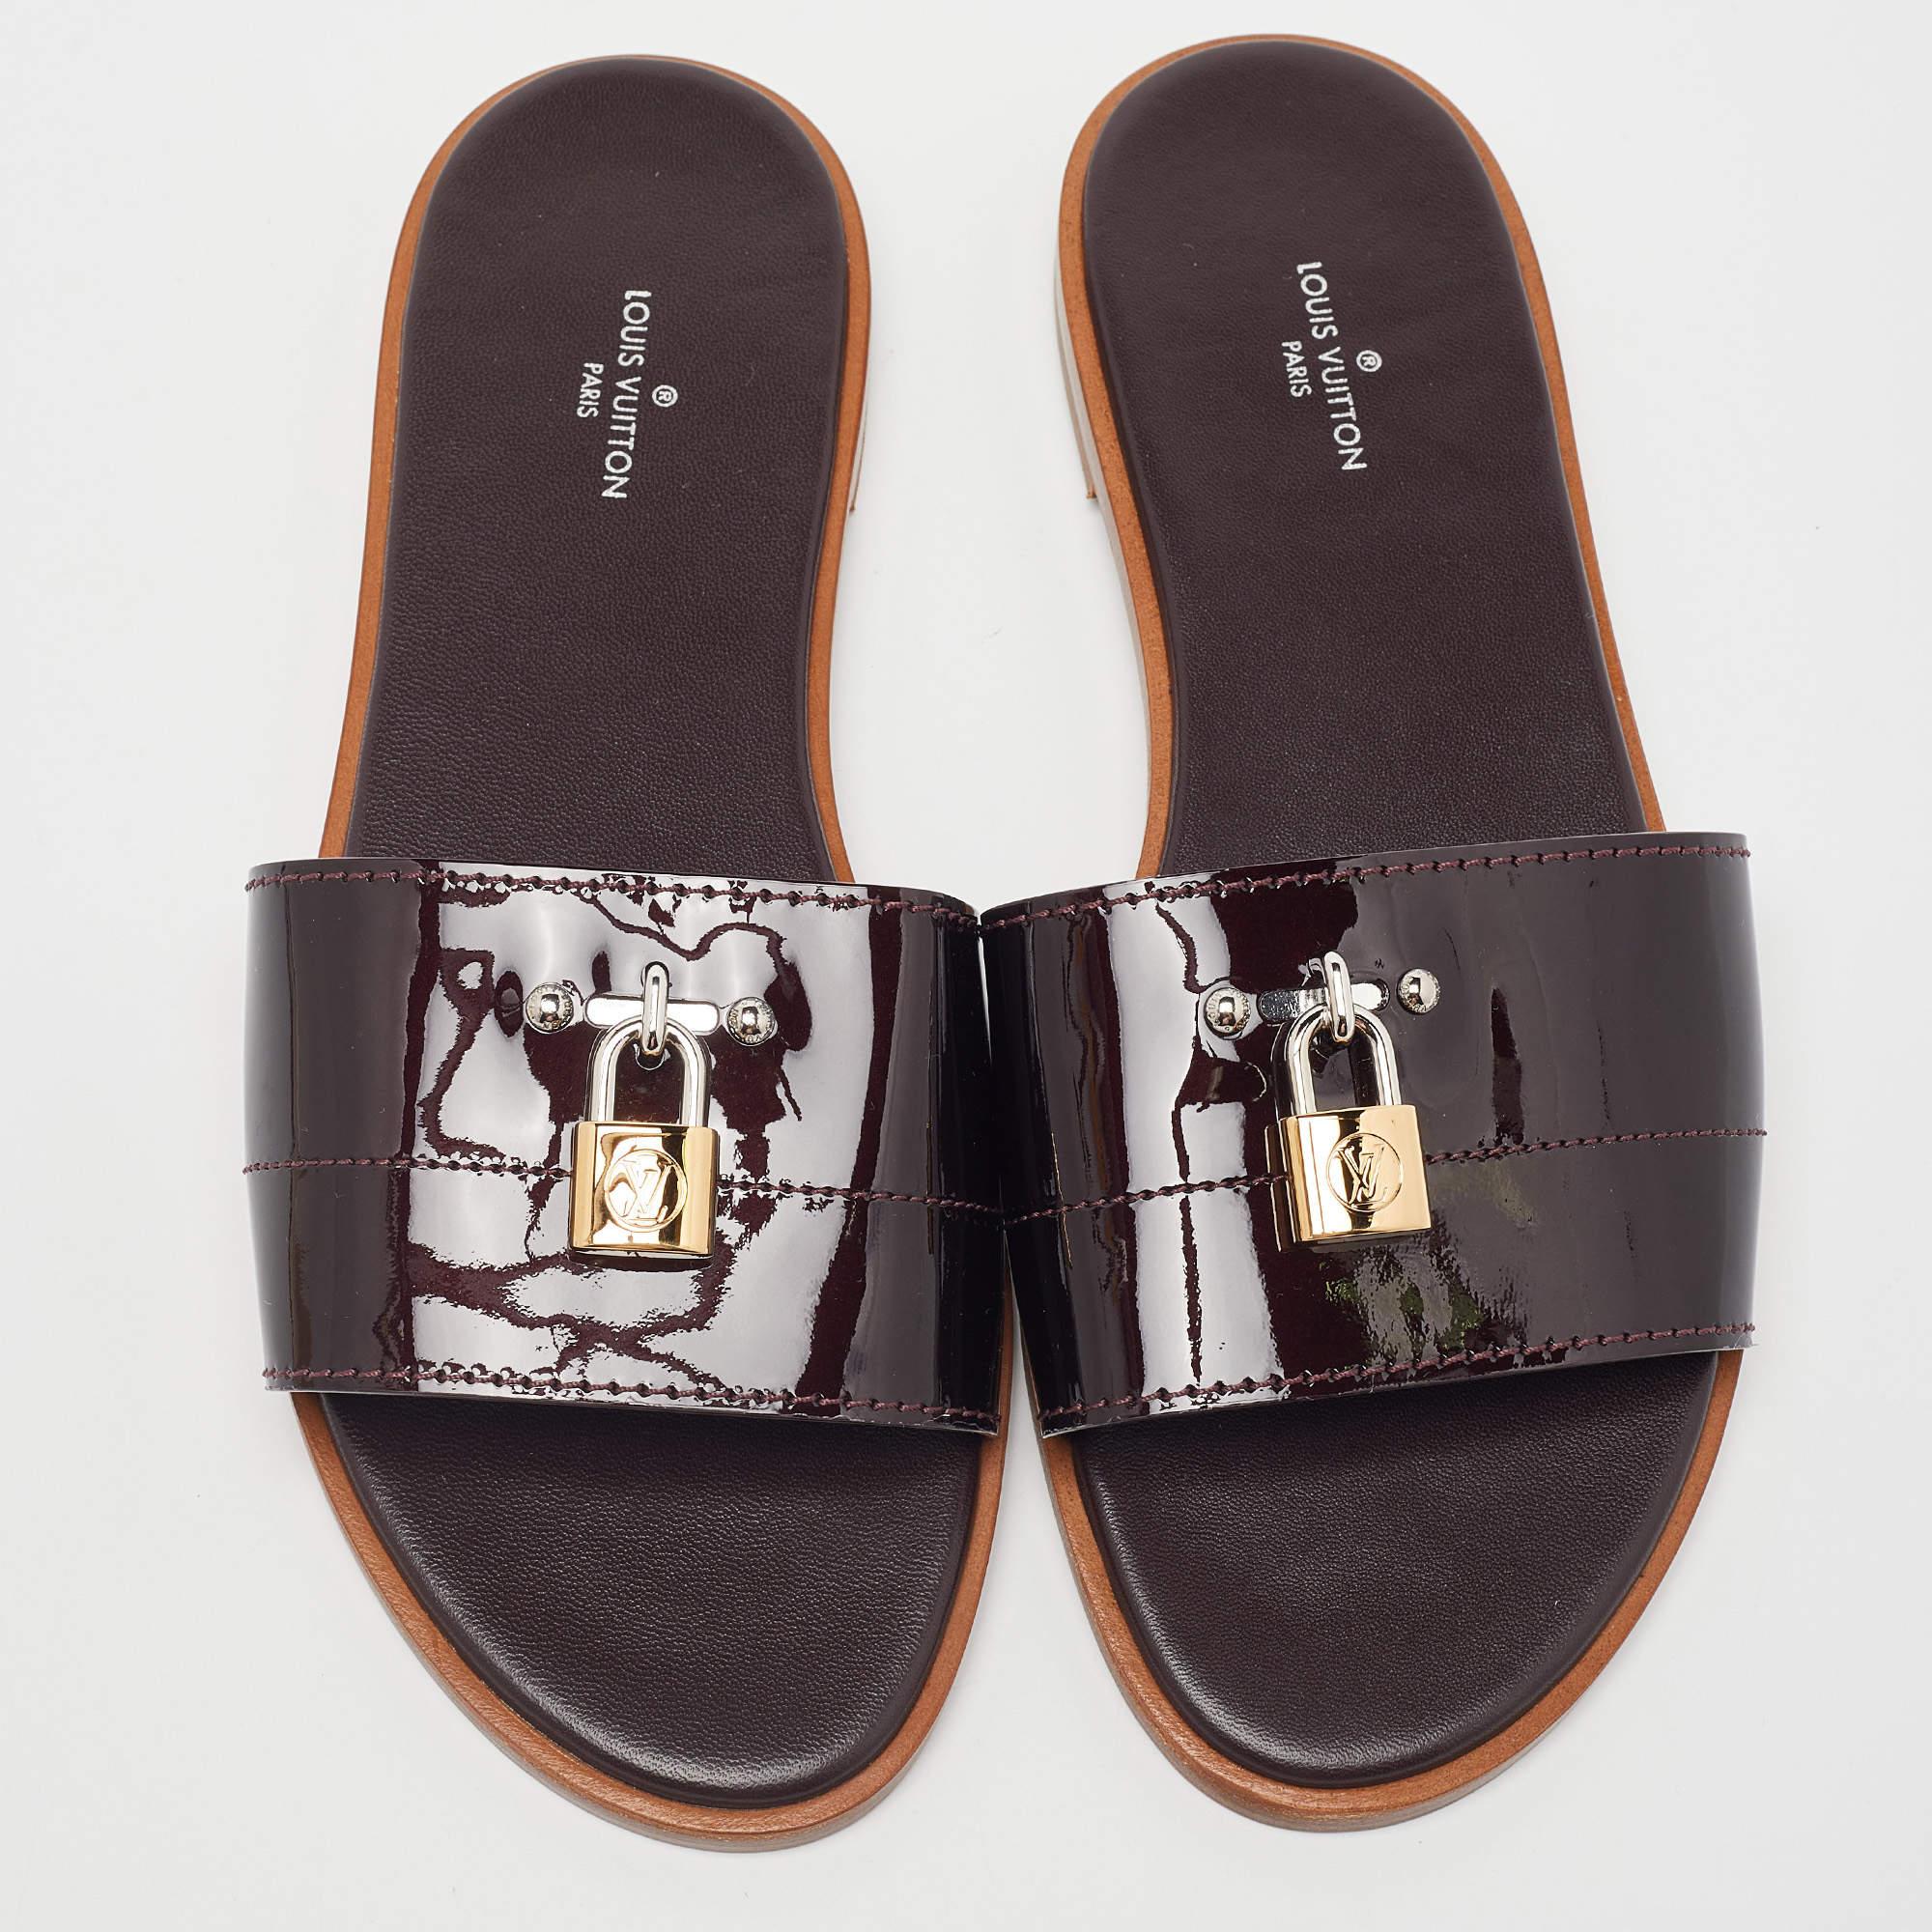 Timelessly elegant and stylish, Louis Vuitton's collections capture the effortless, nonchalant finesse of the modern woman. Crafted from patent leather, these chic Lock It sandals feature open toes and padlock accents.

Includes: Dustbag